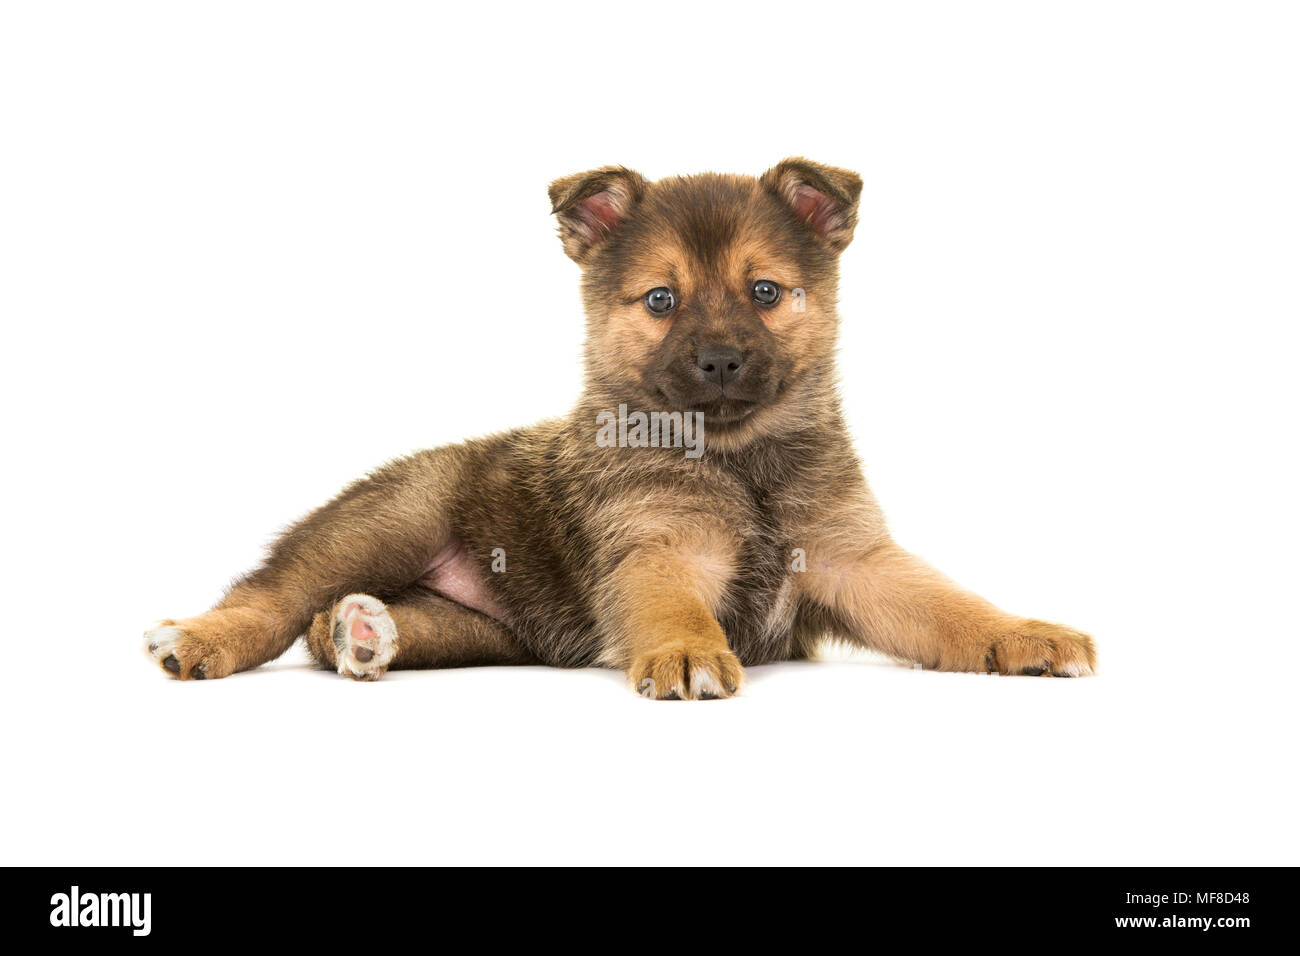 Cute pomsky puppy dog lying down seen from the side looking at the camera isolated on a white background Stock Photo